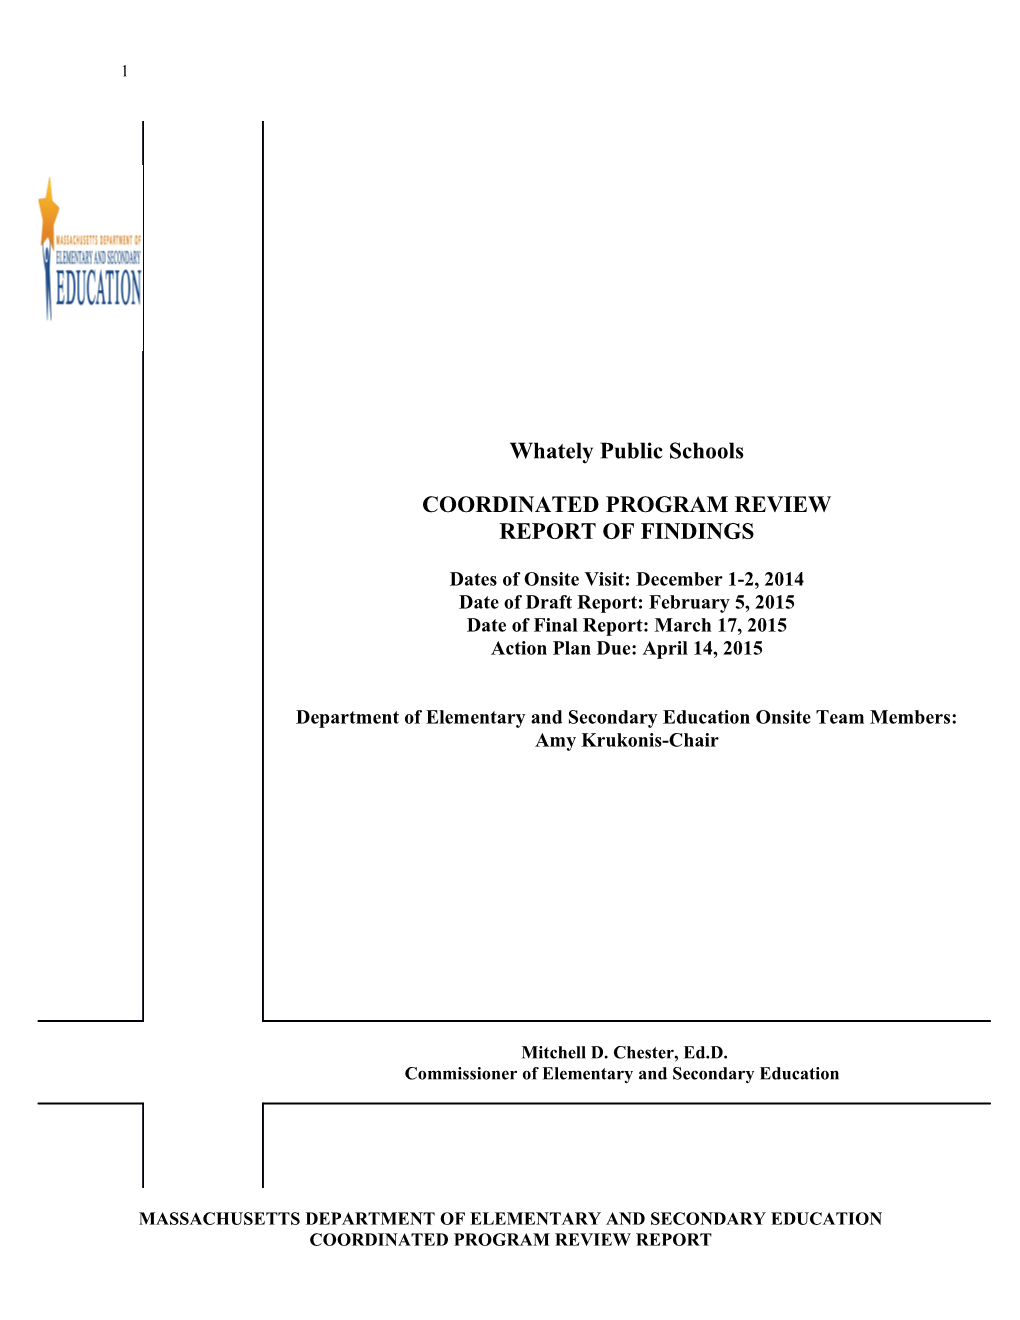 Whately Public Schools CPR Final Report 2015